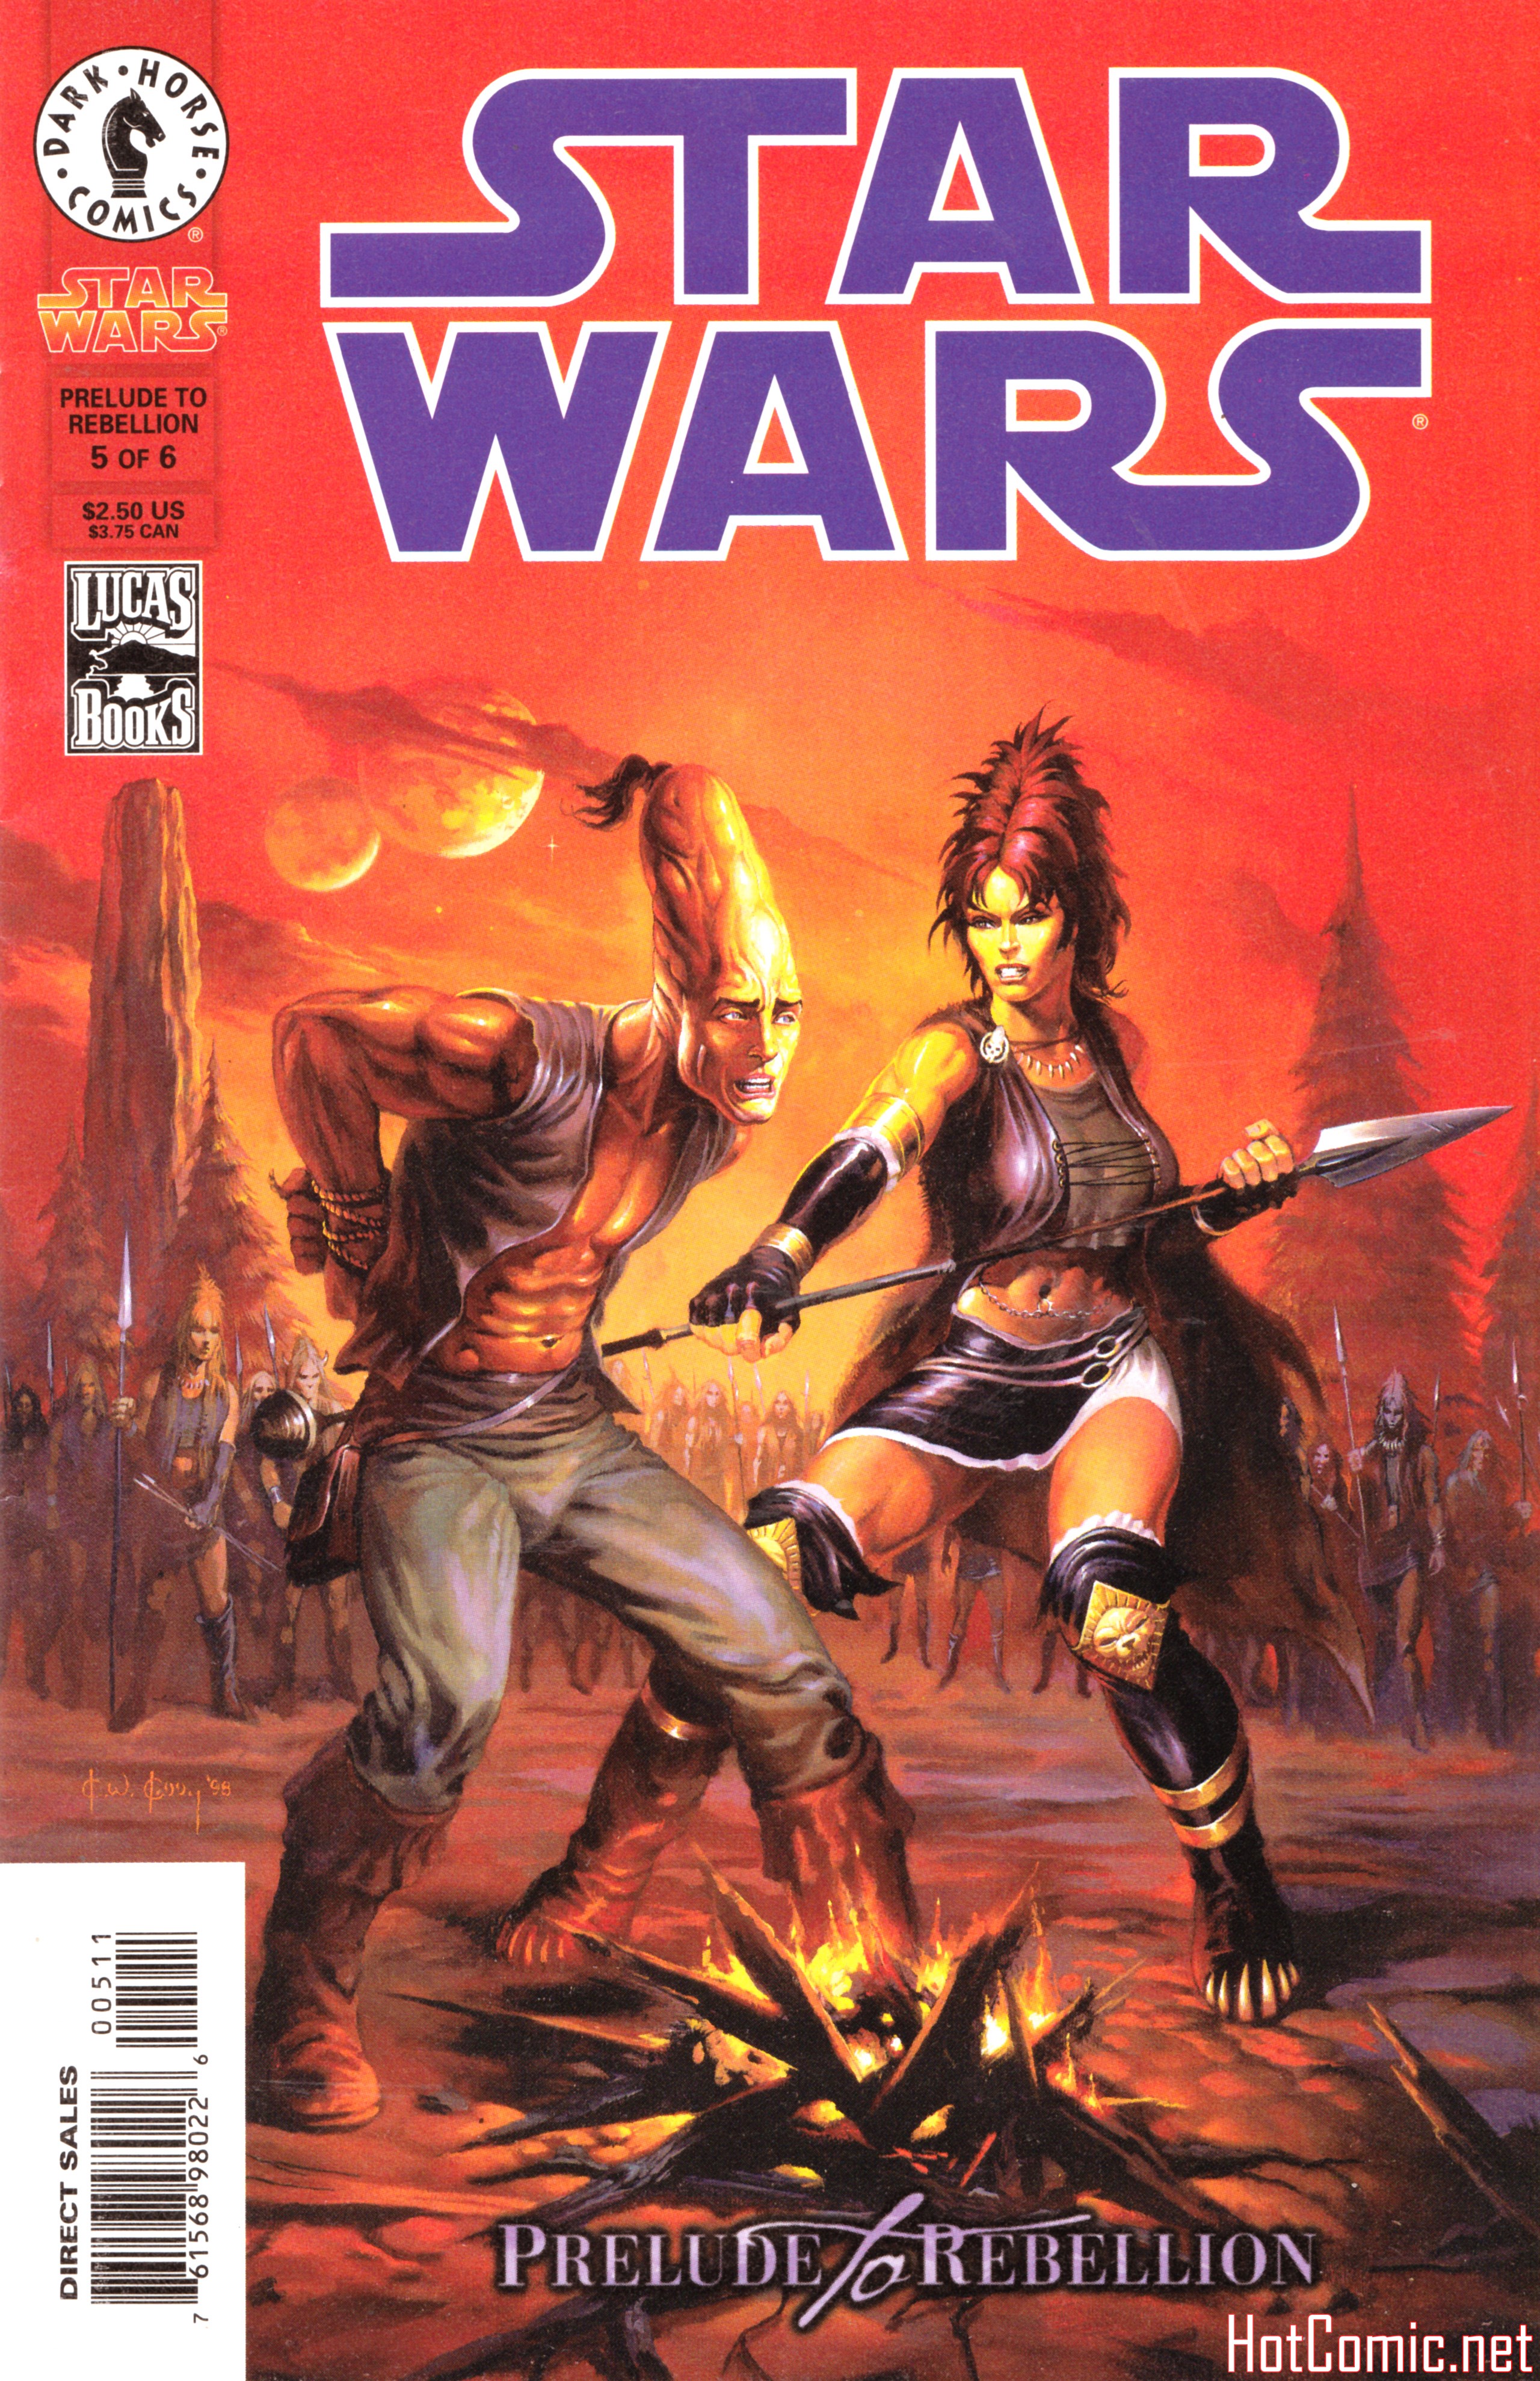 Star Wars: Prelude to Rebellion (Issue 4-6)